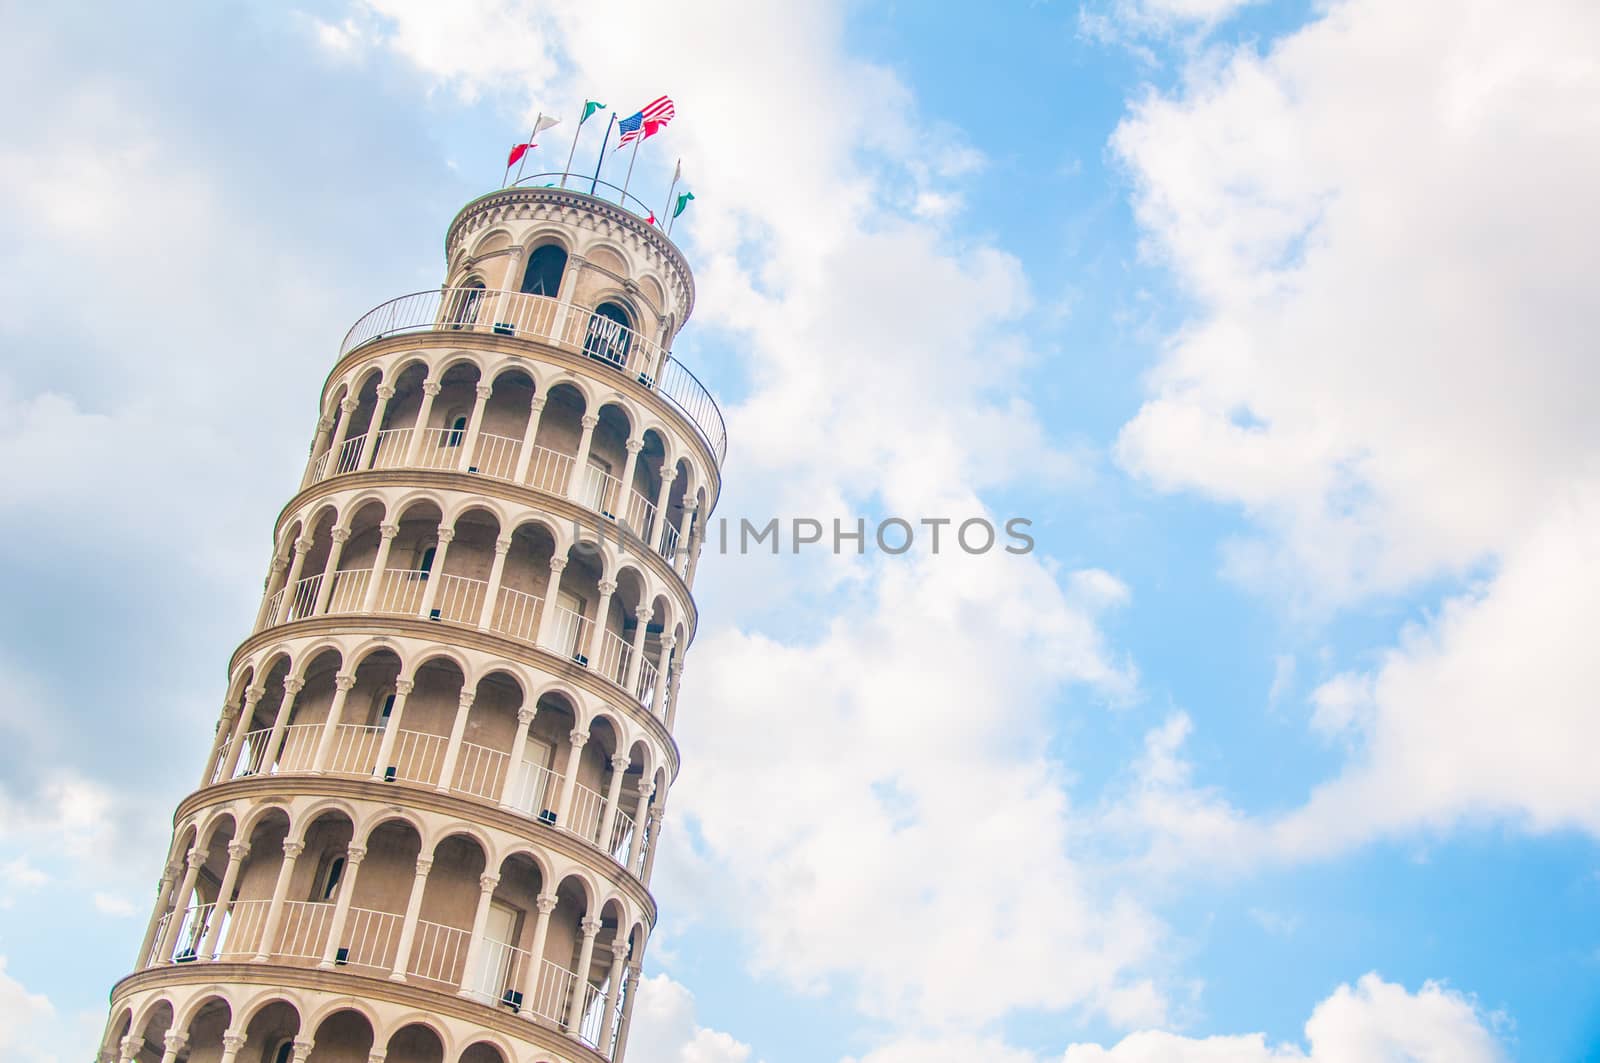 Pisa Tower by CHR1